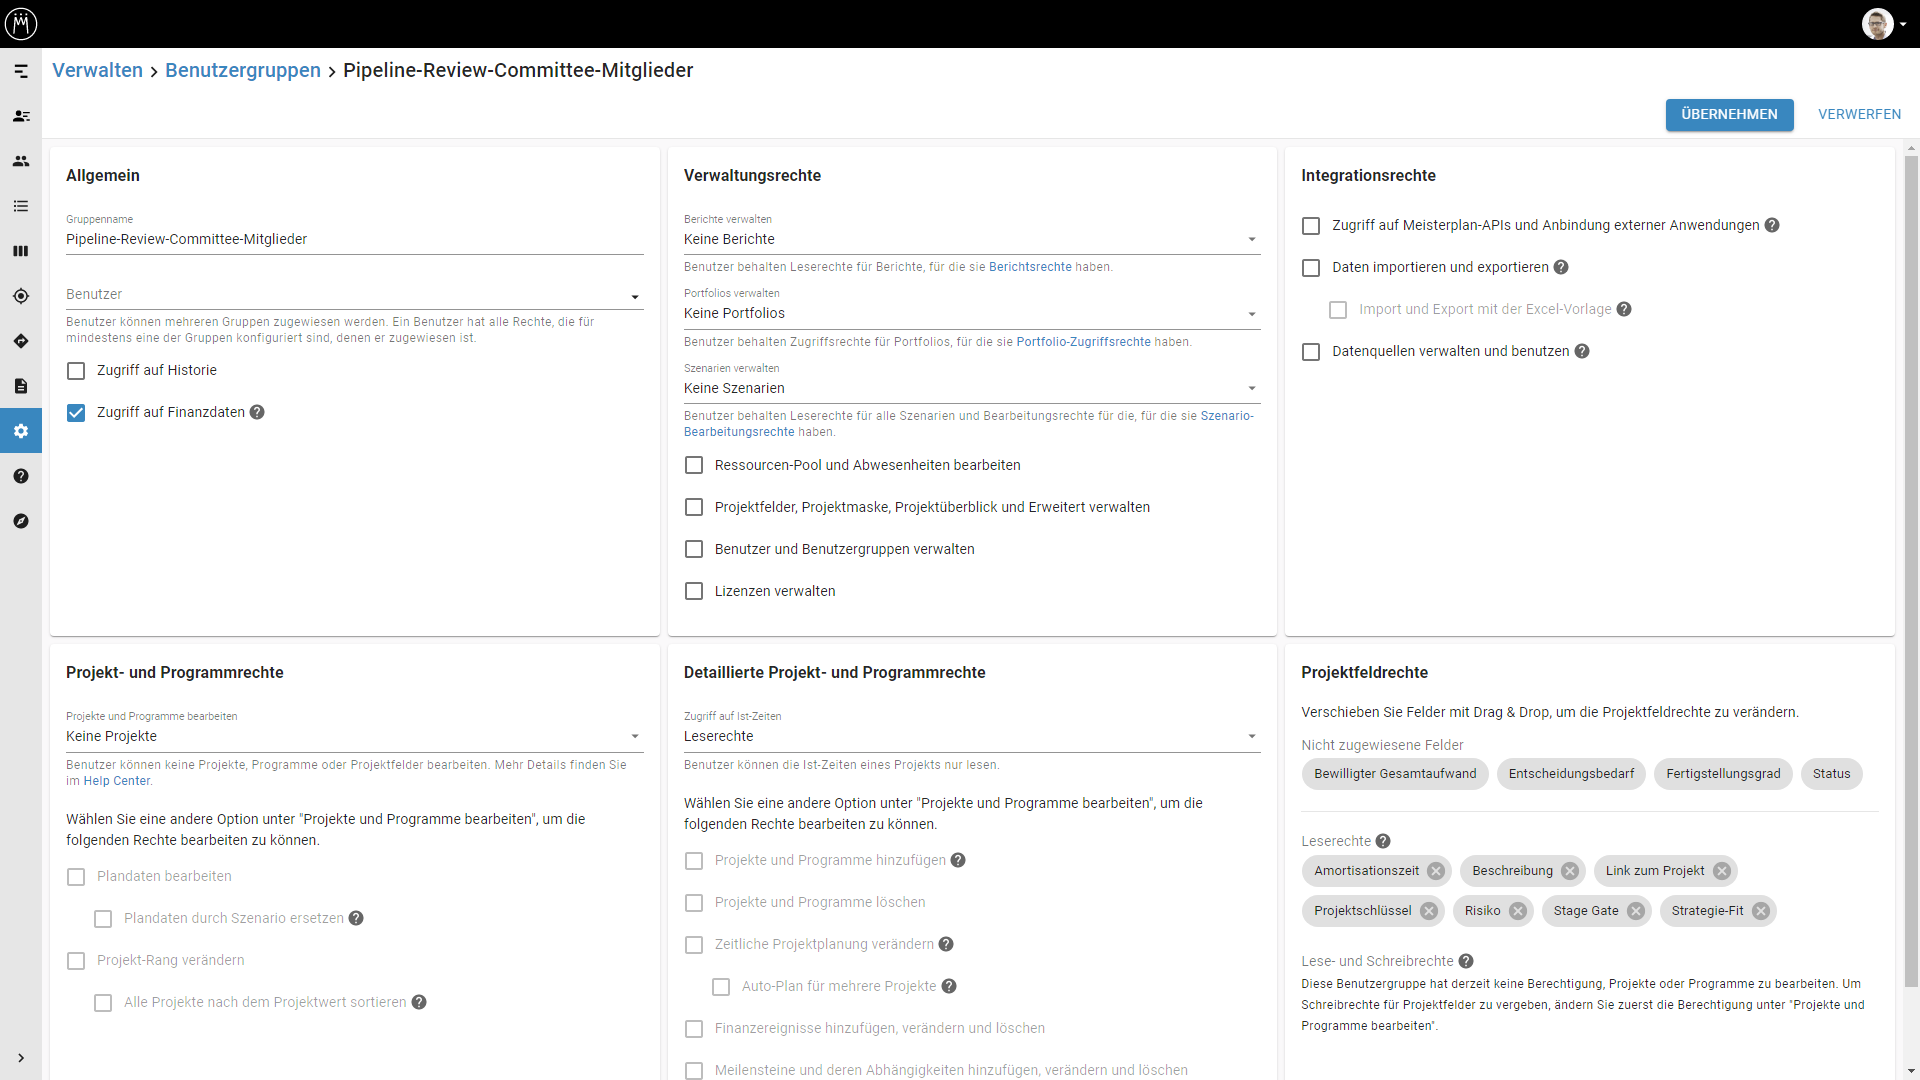 Benutzergruppe-Mitglied-Pipeline-Review-Comittee-1.3.png